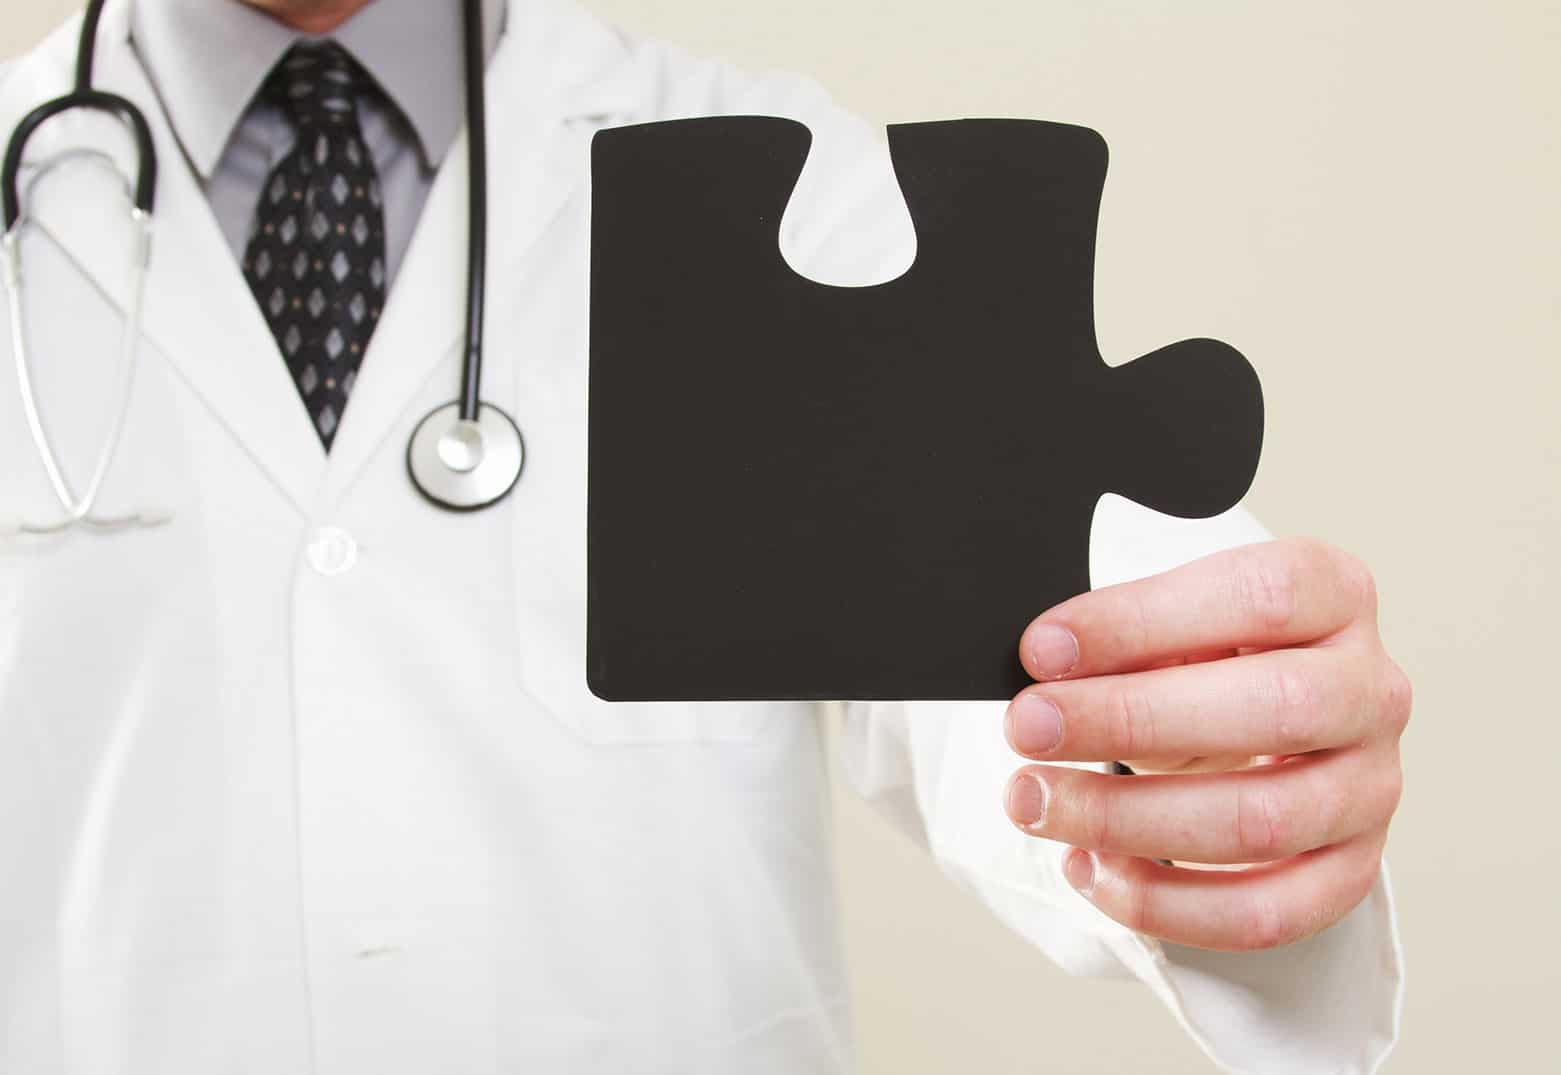 A physician holding a missing piece of a puzzle representing a care gap.